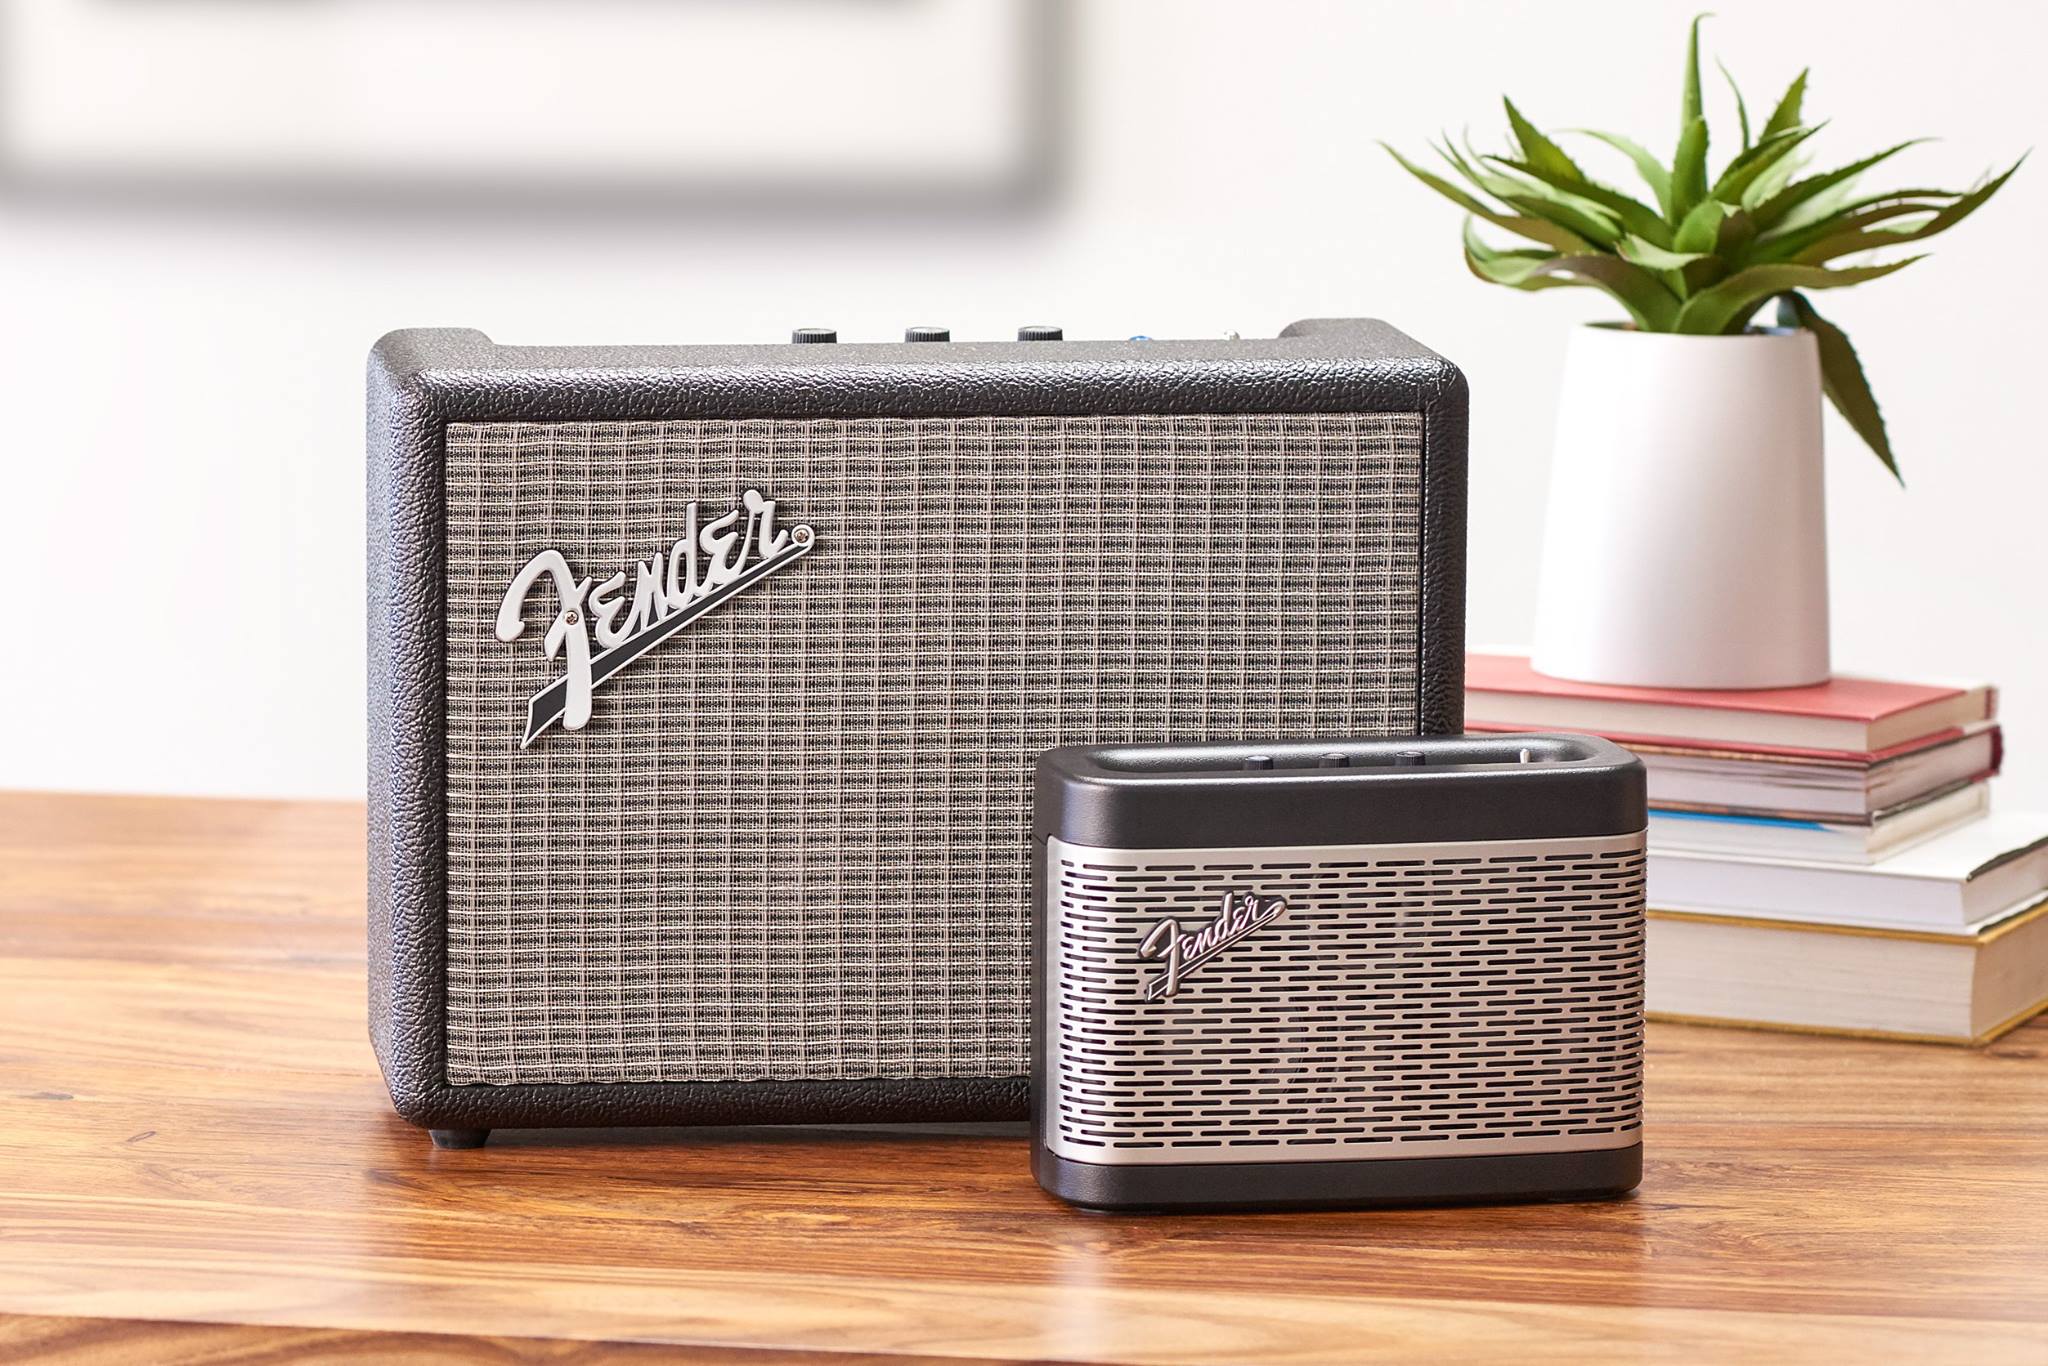 These gorgeous Fender amps are actually new Bluetooth speakers